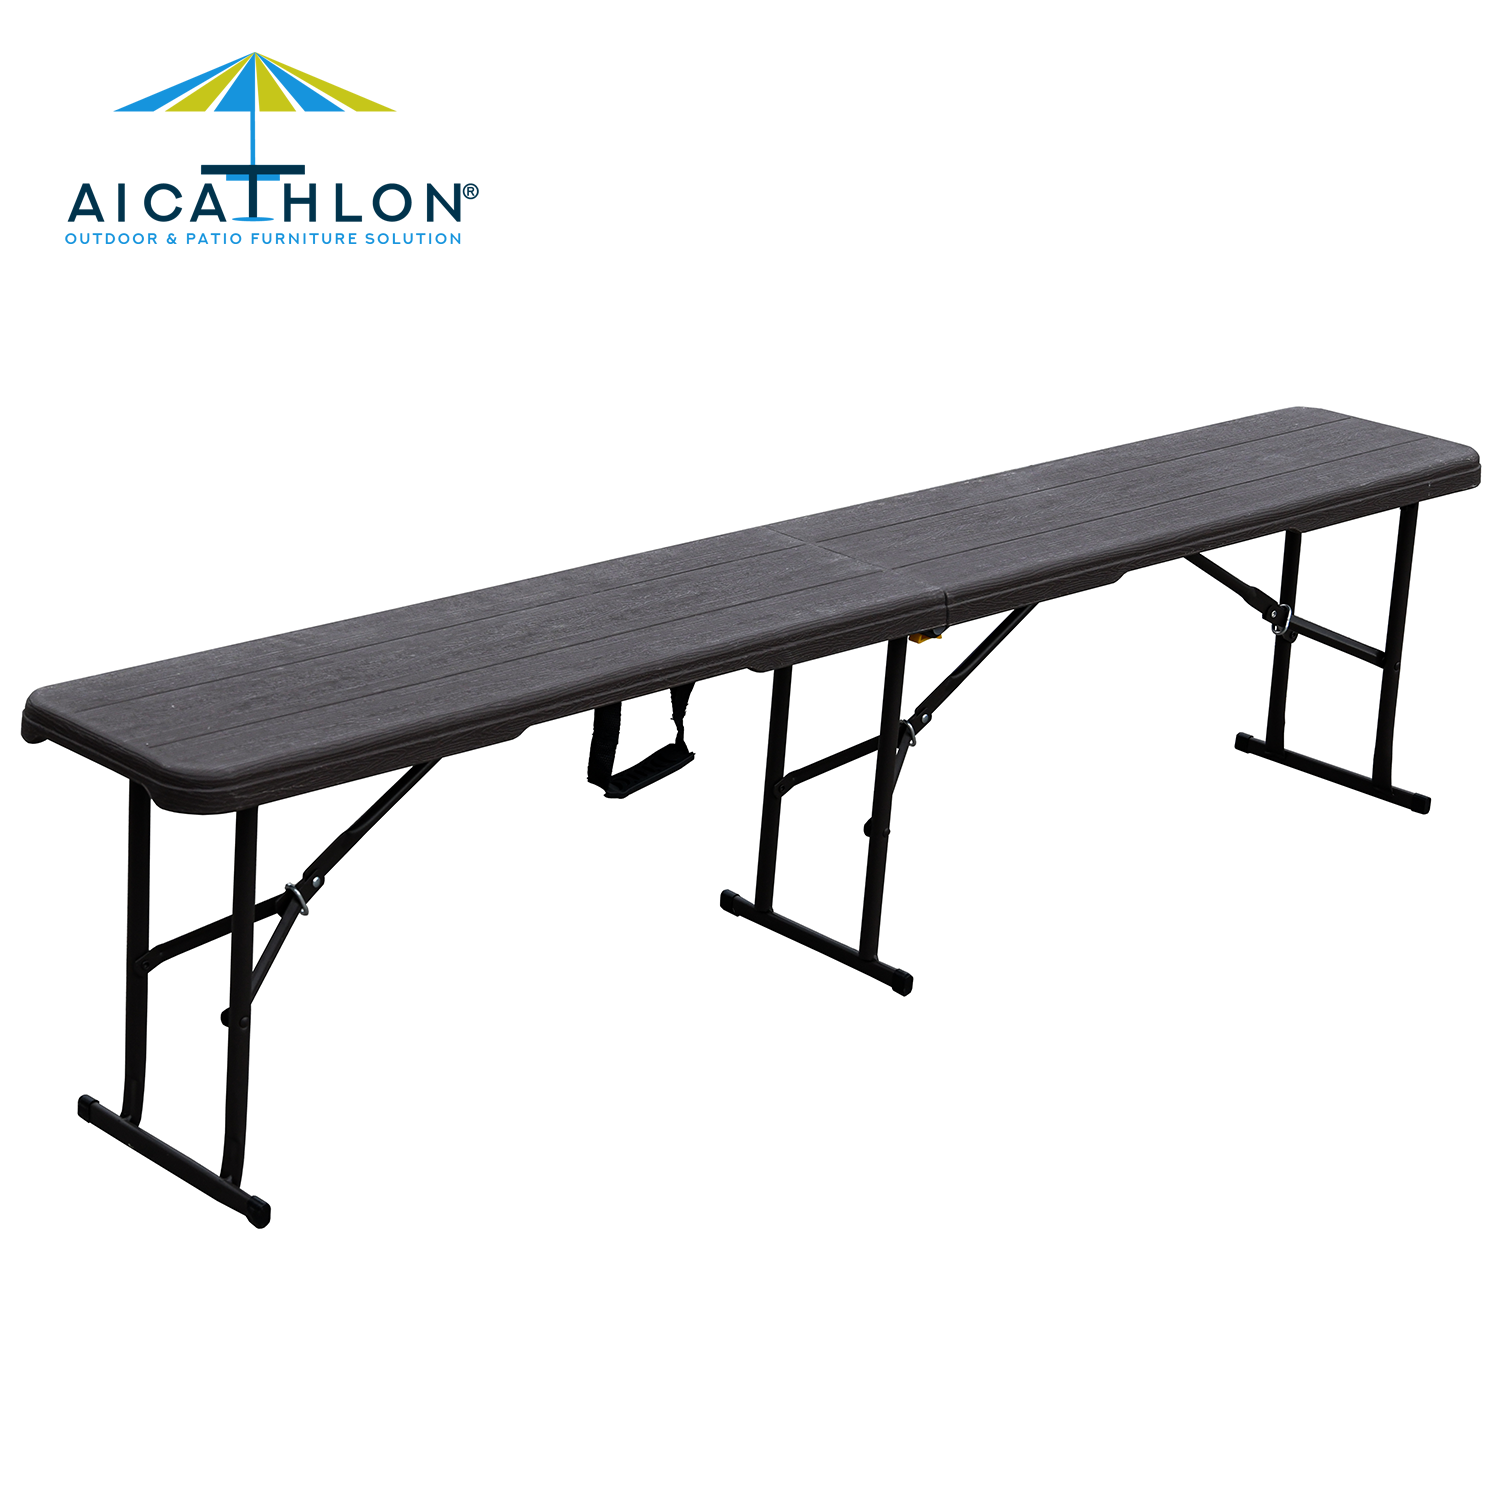 6 Feet Plastic Folding Portable Bench Factory with Carrying Handle for Garden